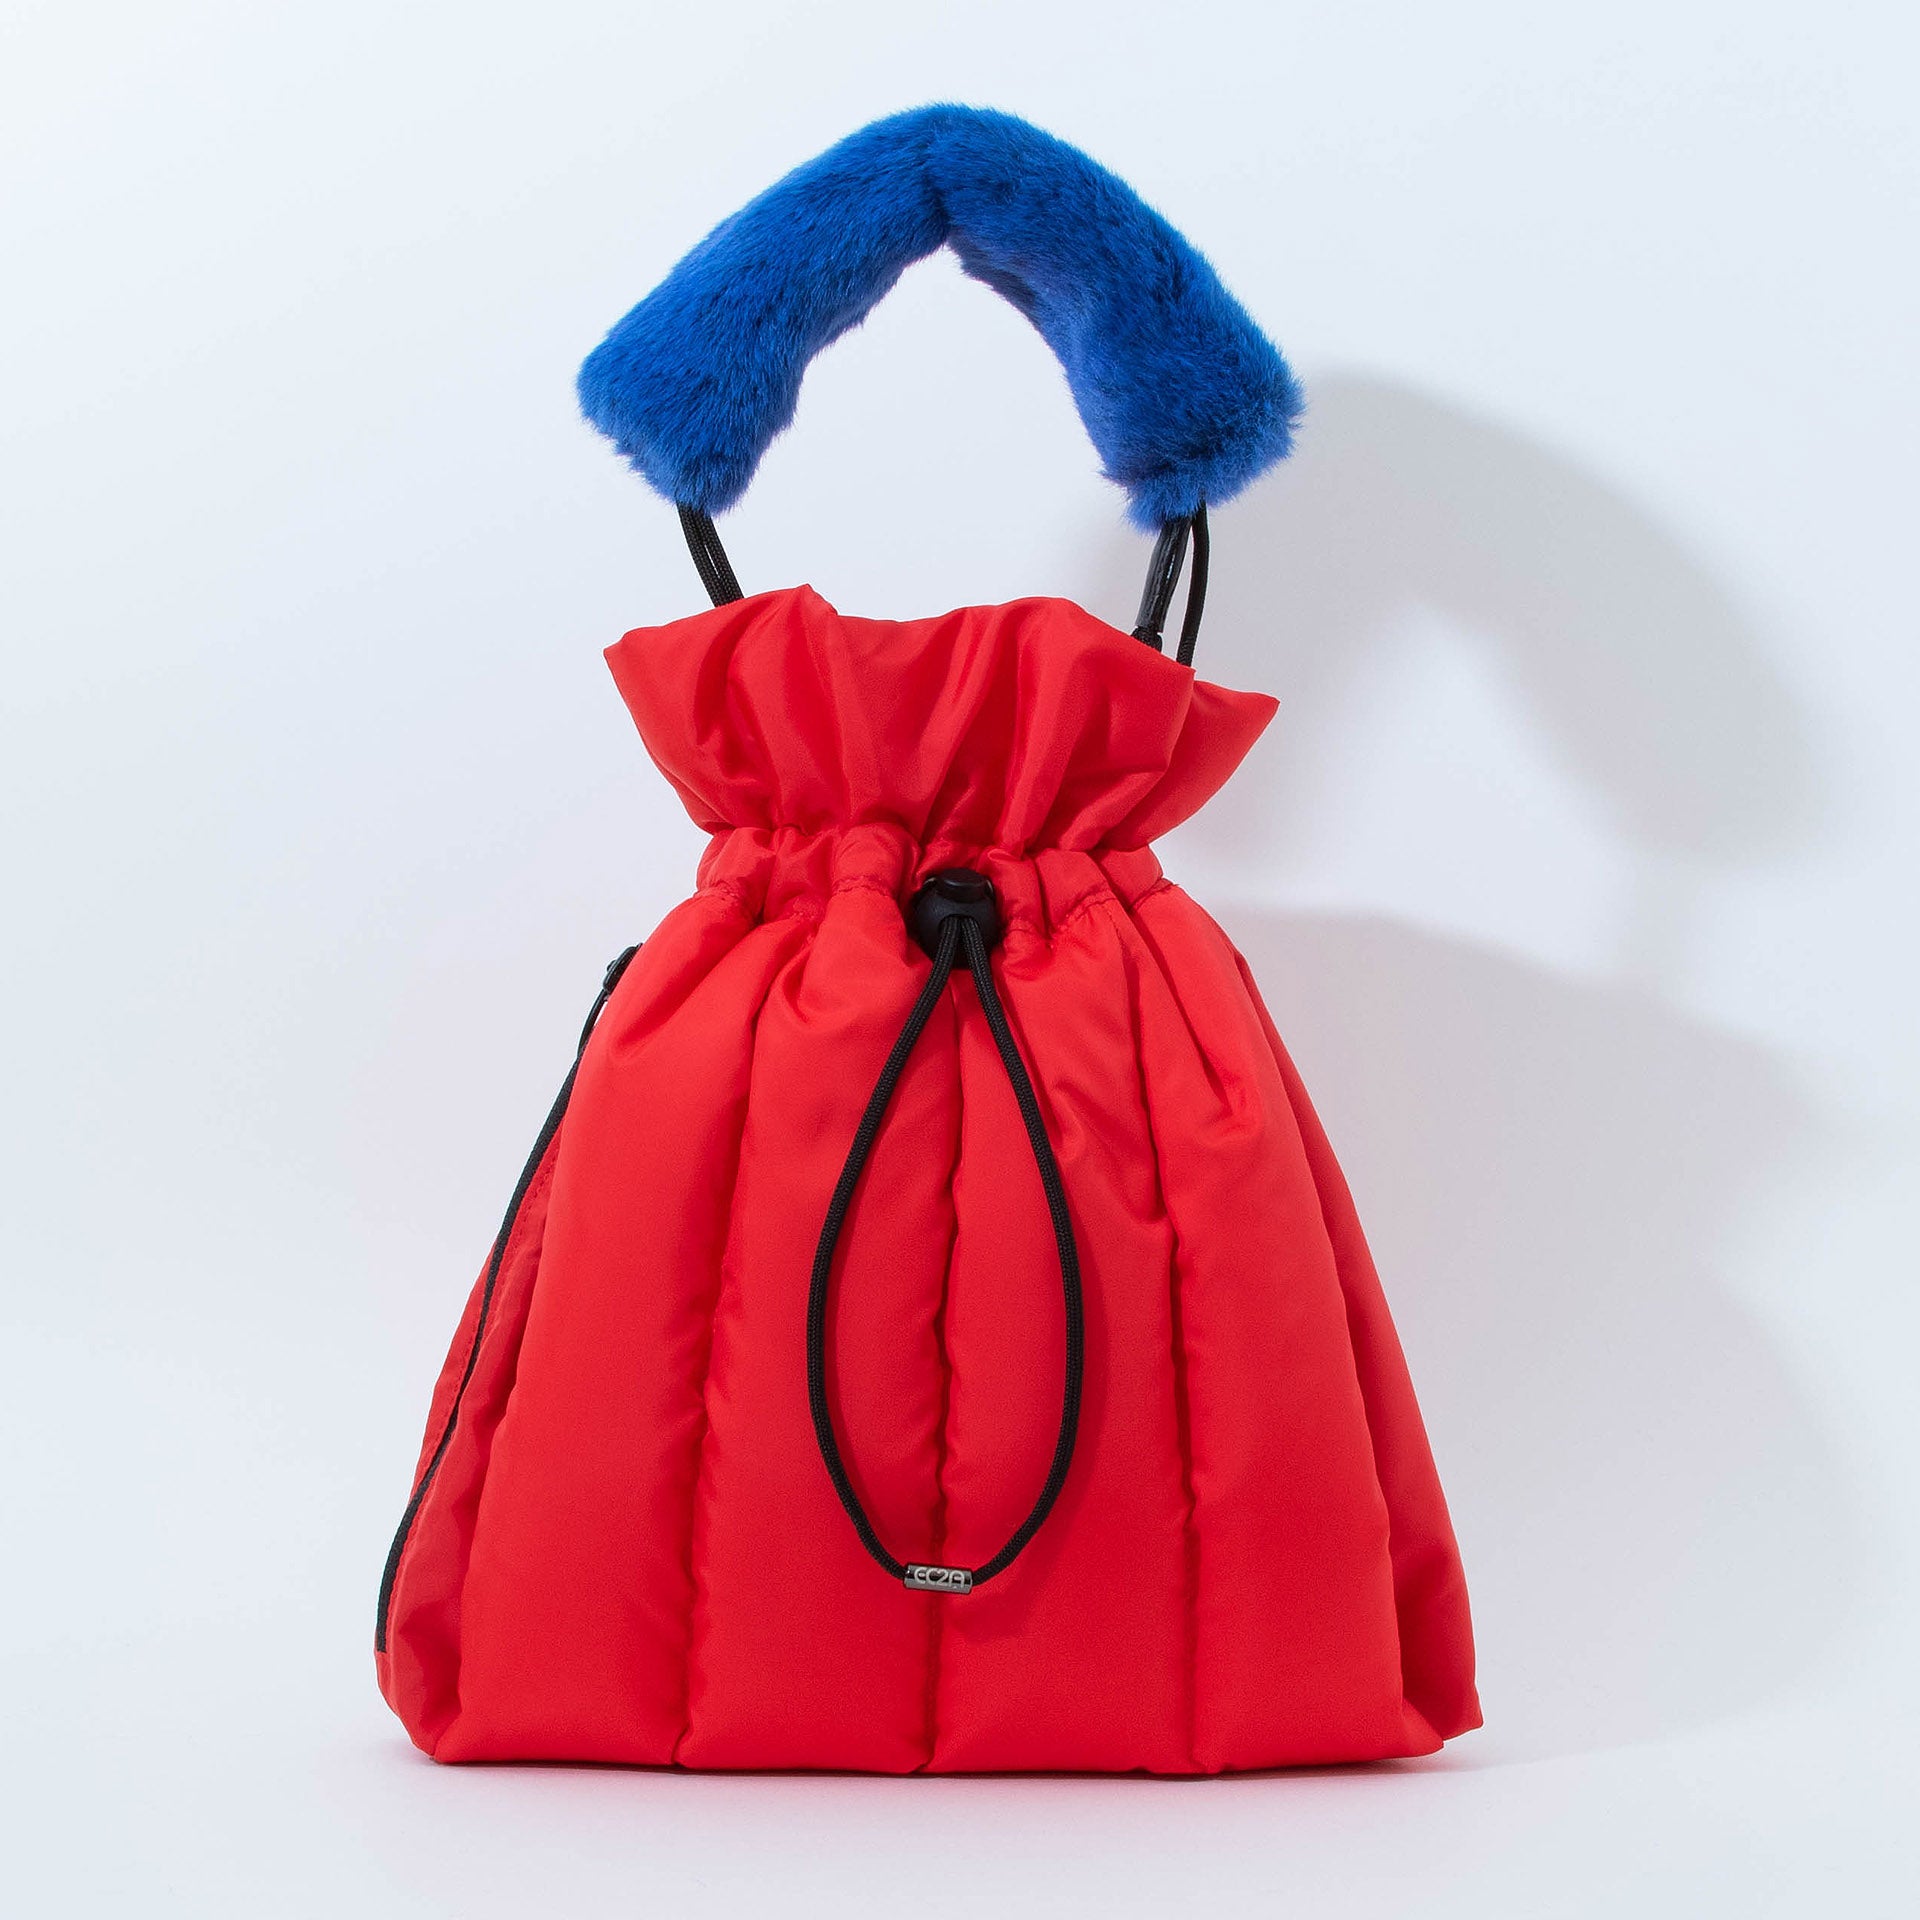 EC2A red duck down puffer drawstring bag with short handle blue caterpillar shoulder accessory